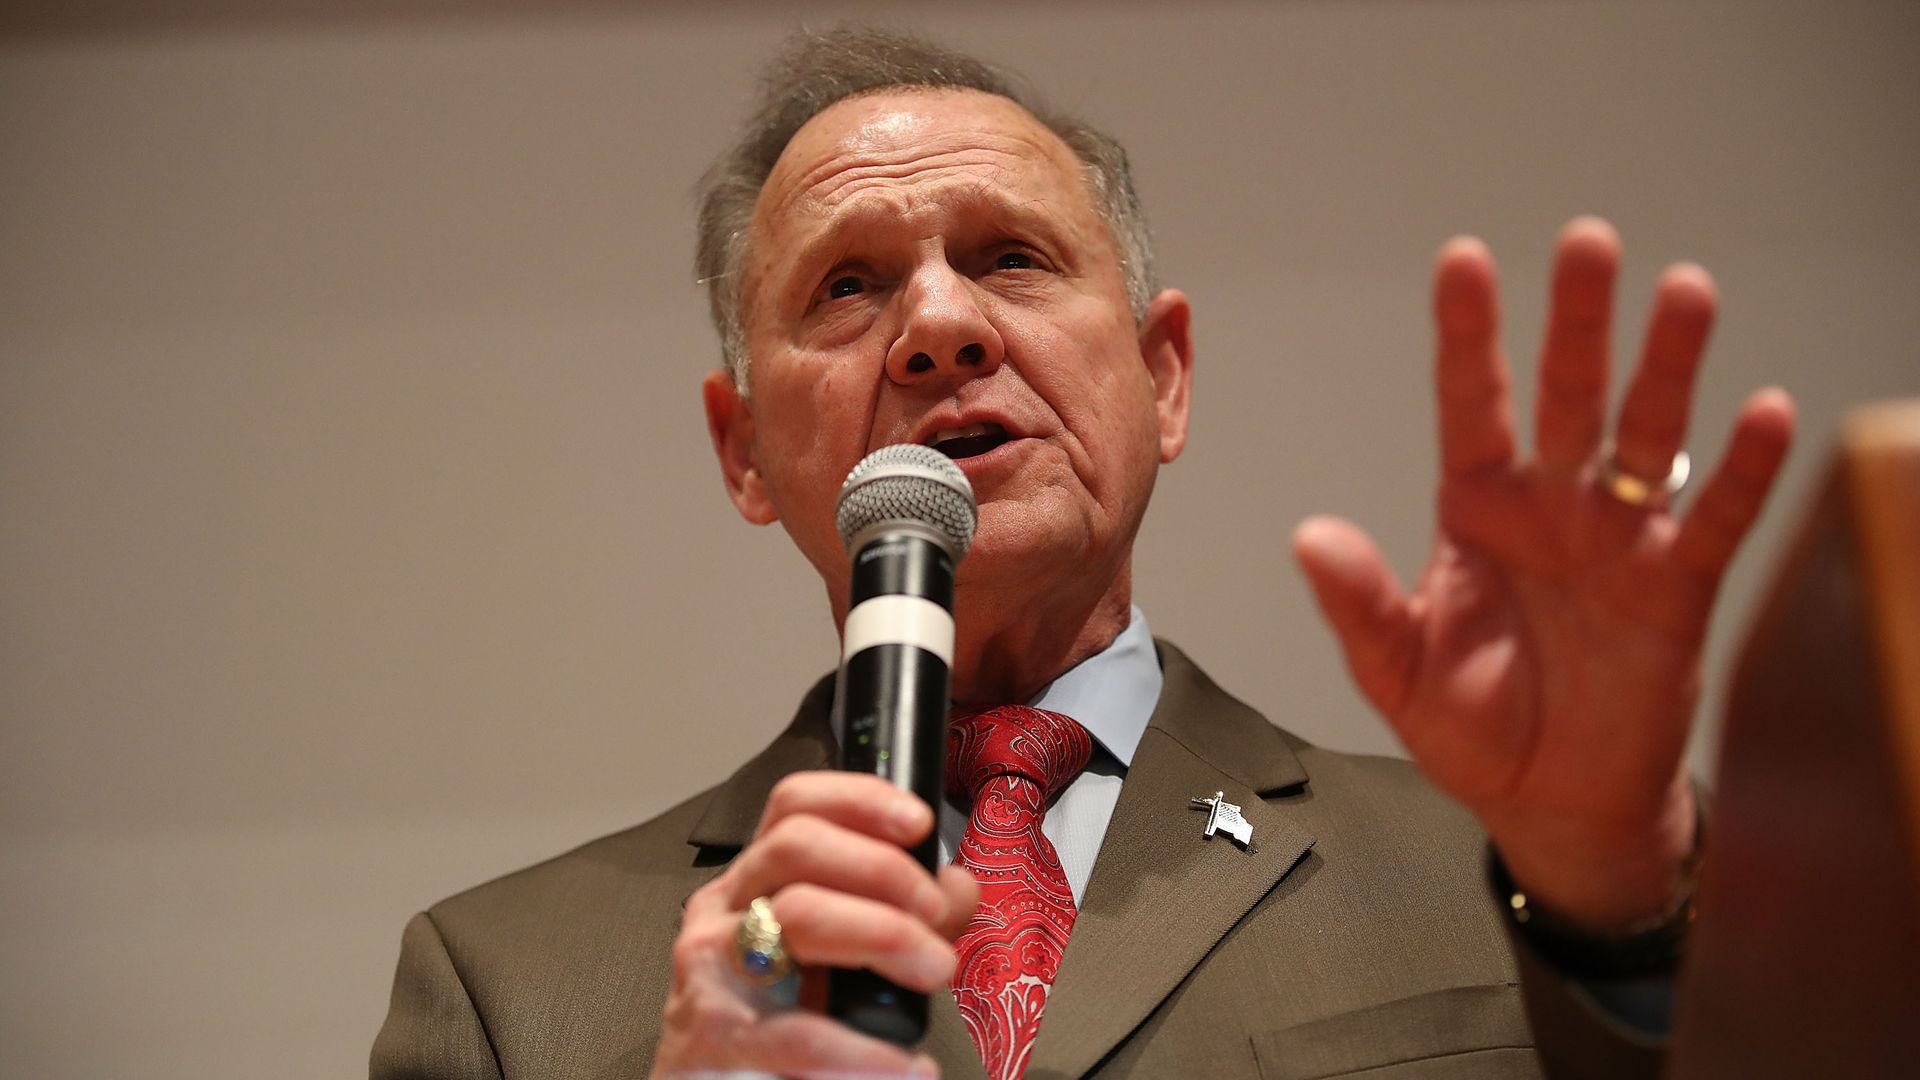 In this image, Roy Moore speaks into a microphone and waves a hand. 